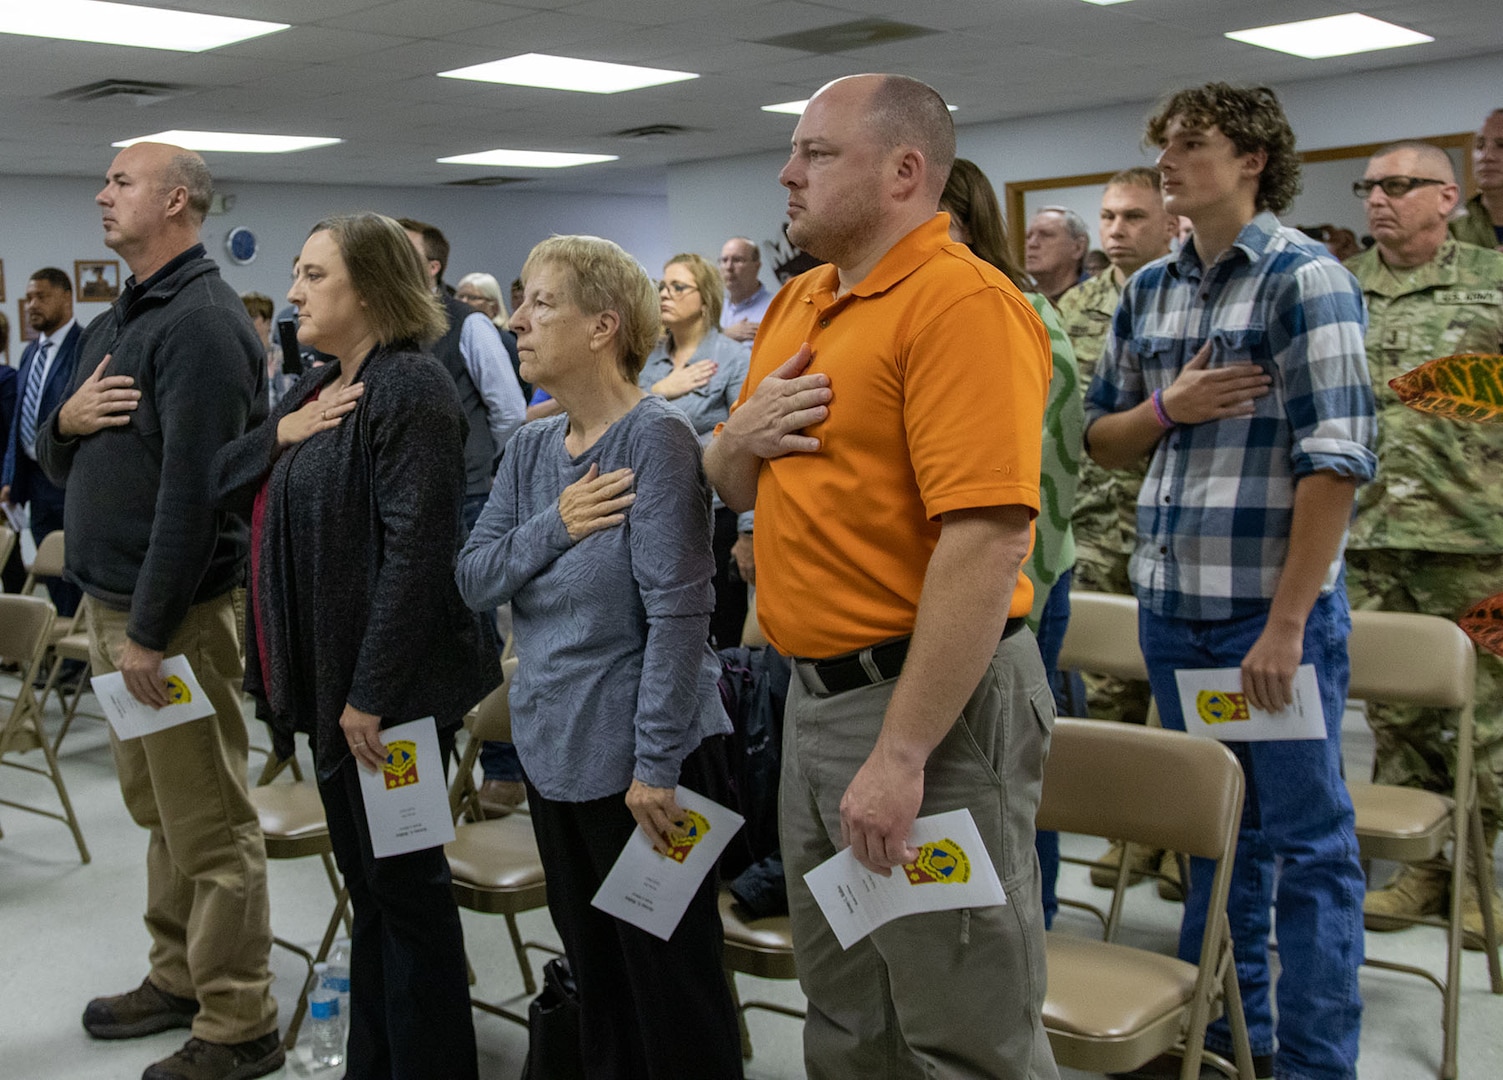 Illinois Army National Guard Spc. Jeremy Ridlen's family, including mother Cheryl, sister Amanda and brother Jason, stand during the national anthem during a ceremony dedicating the Maroa, Illinois post office in honor of Ridlen, Oct. 25 at the Maroa Fire Department.